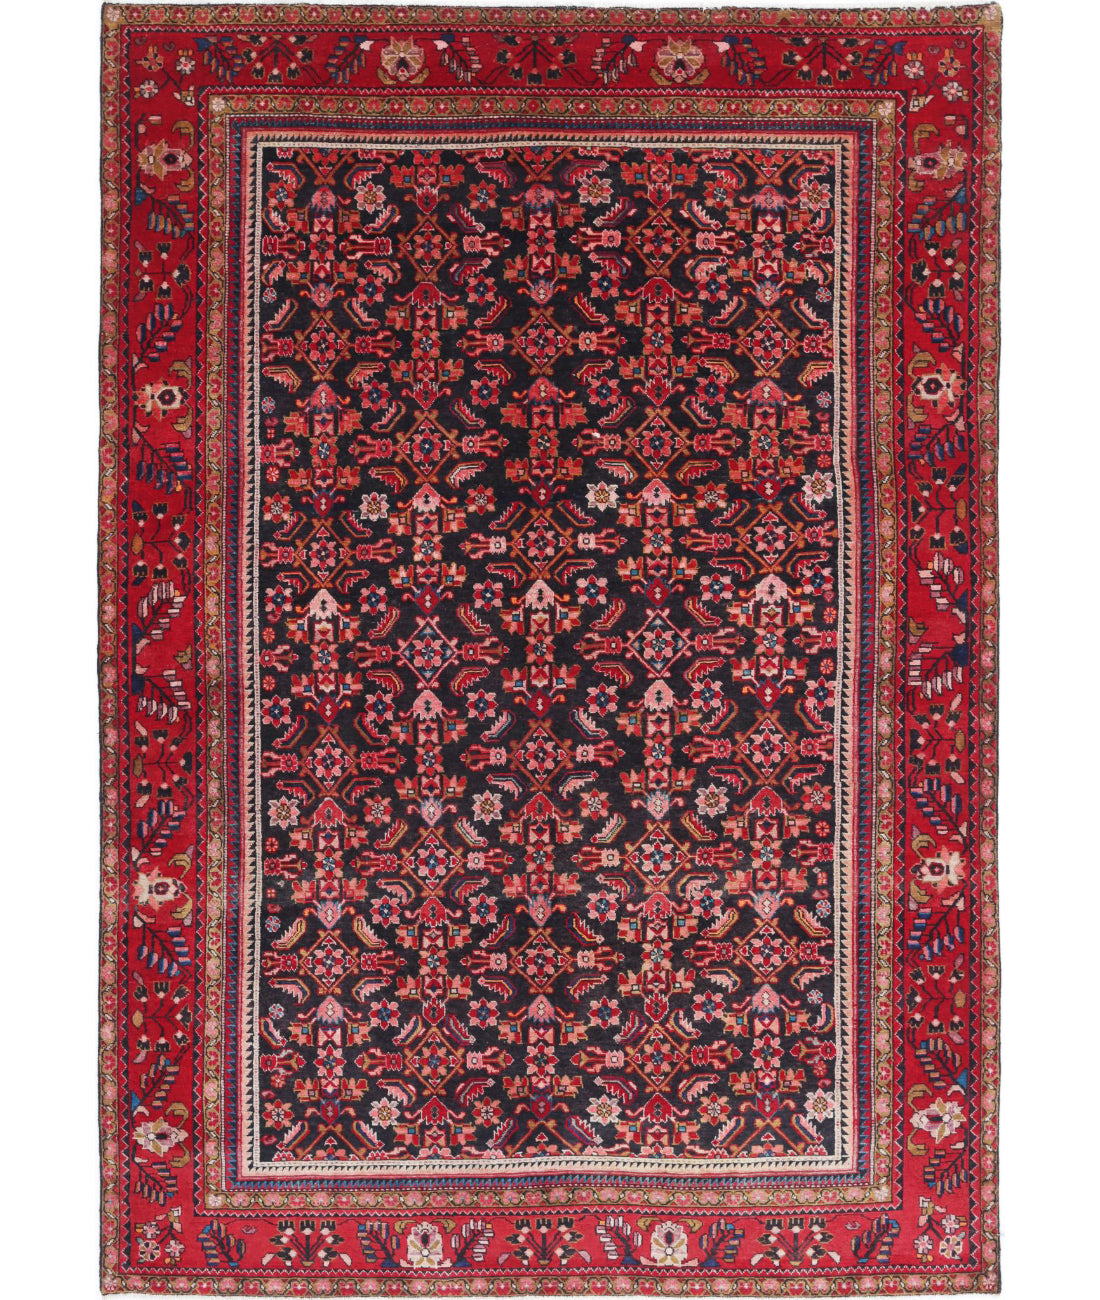 Hand Knotted Persian Hamadan Wool Rug - 6'11'' x 9'11'' 6'11'' x 9'11'' (208 X 298) / Black / Red